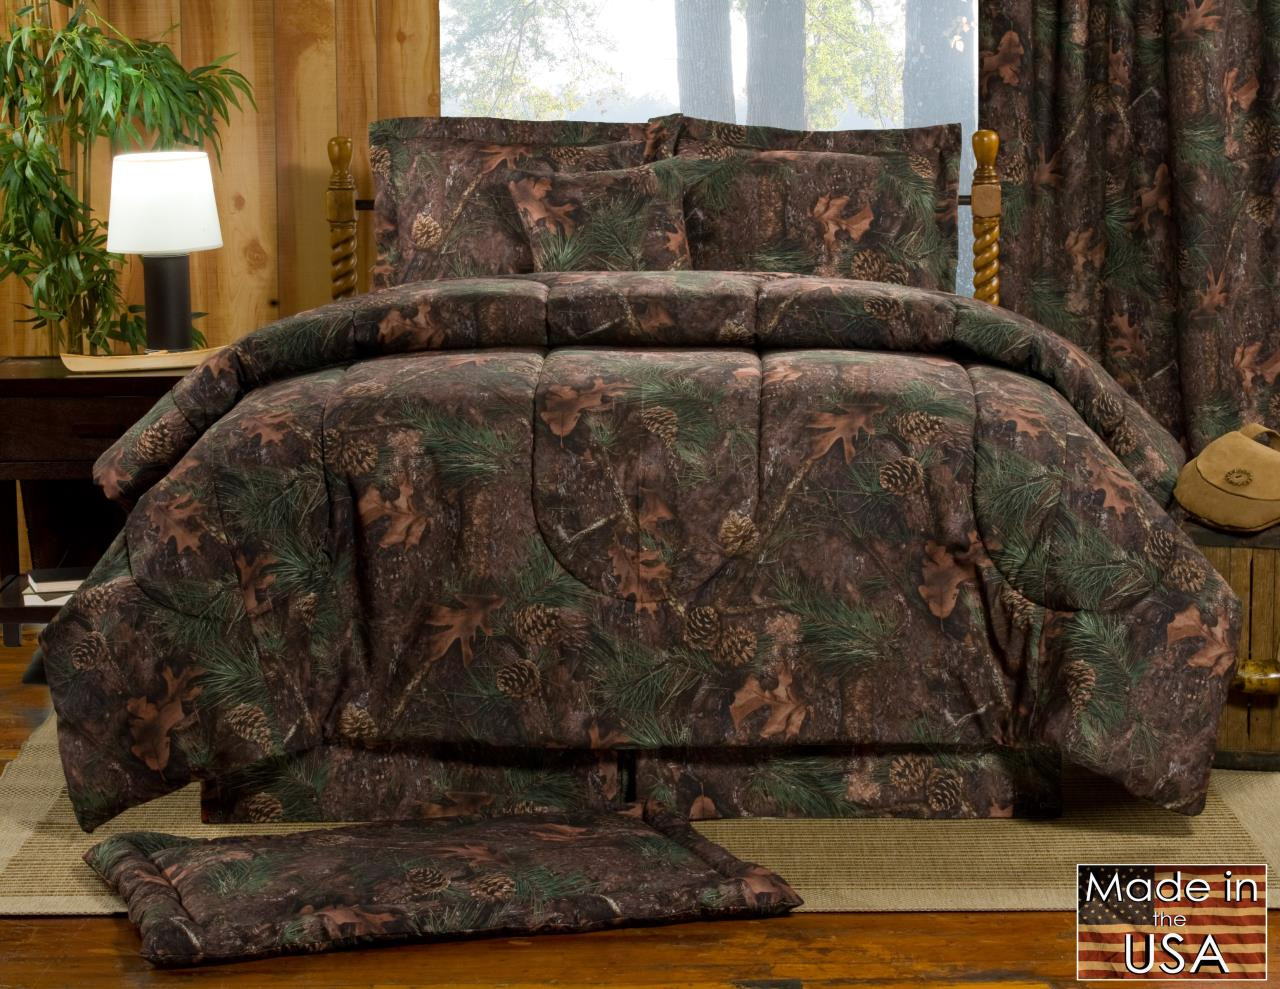 Mixed Pine Bedding Collection -